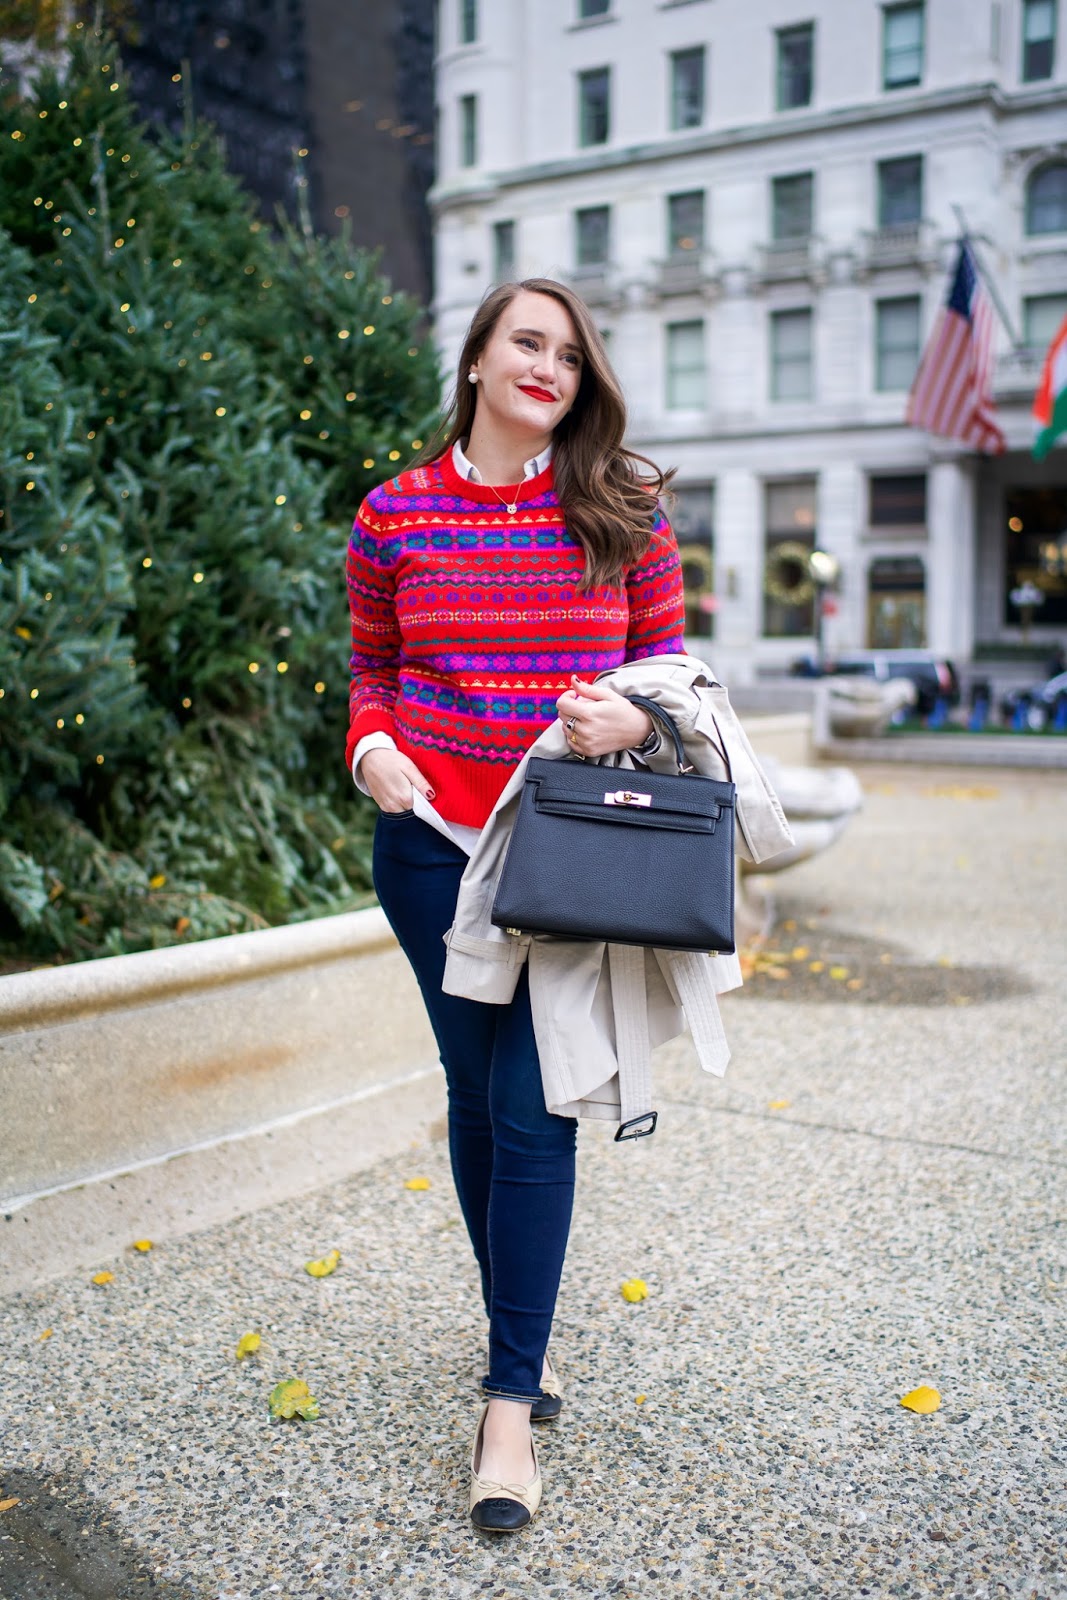 Holiday Fair Isle Sweater | Connecticut Fashion and Lifestyle Blog ...